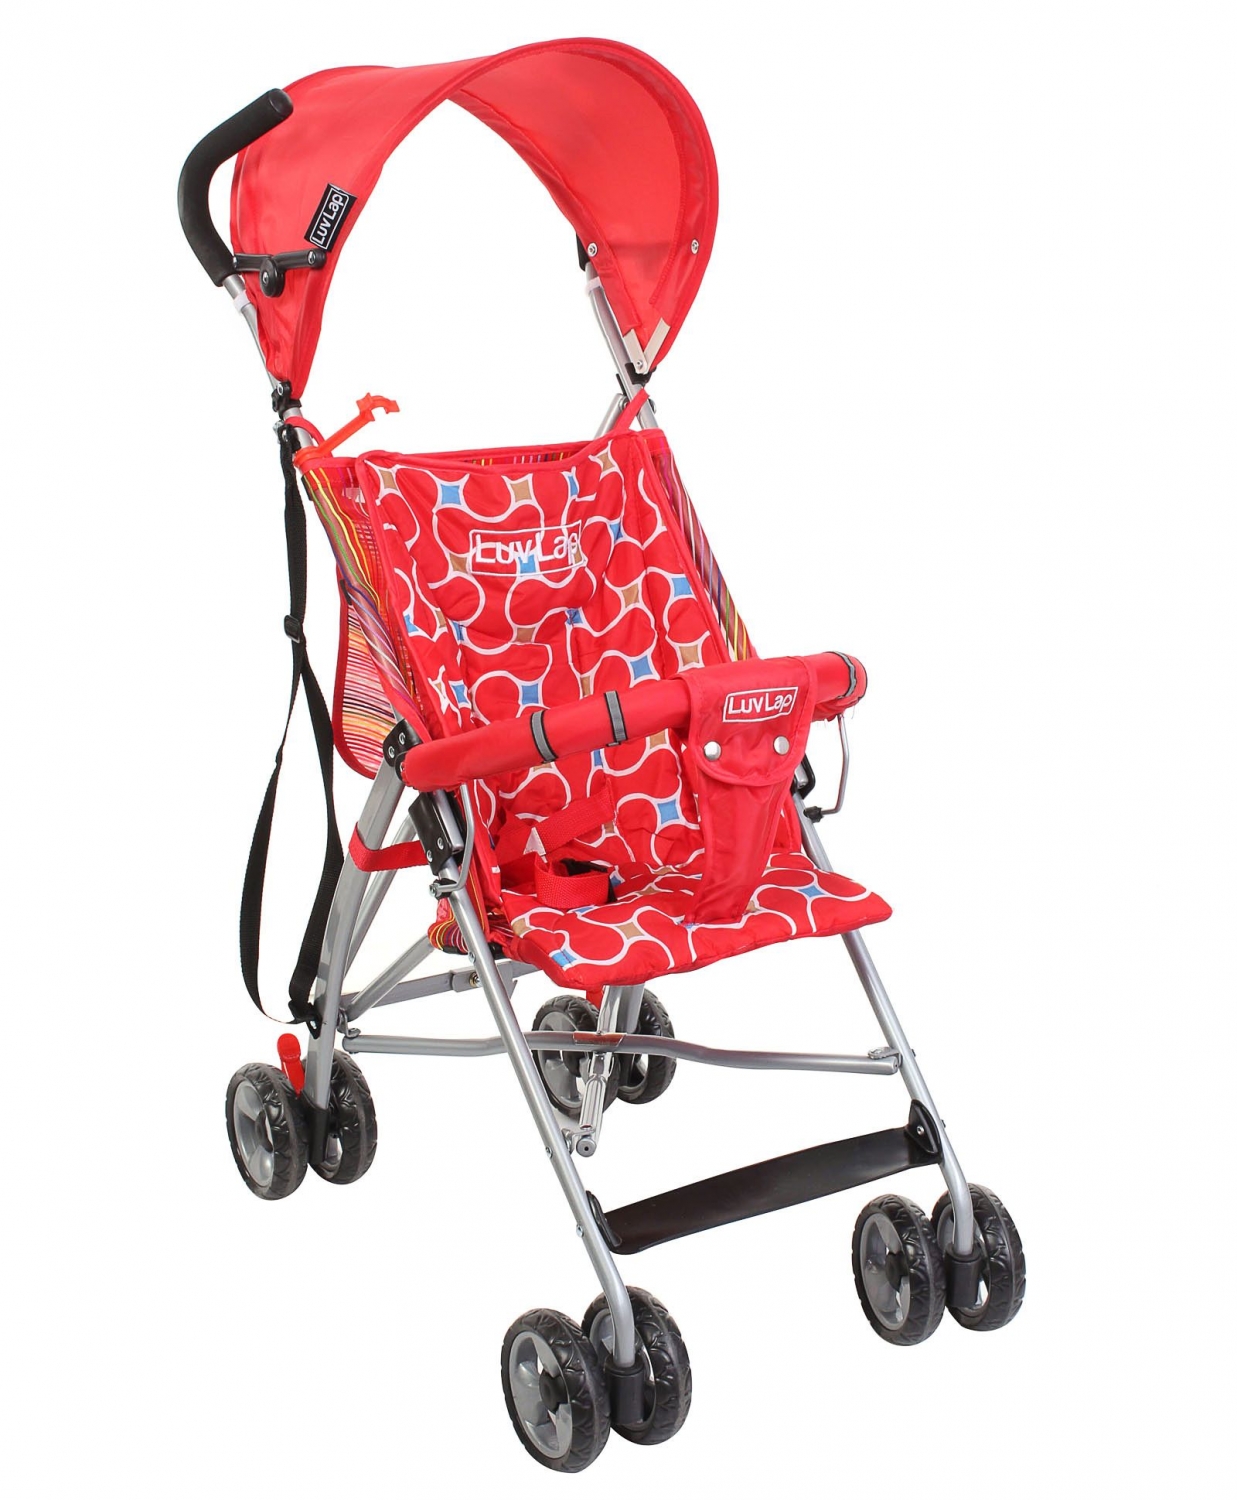 Luv Lap Sunshine Baby Buggy Stroller - Red